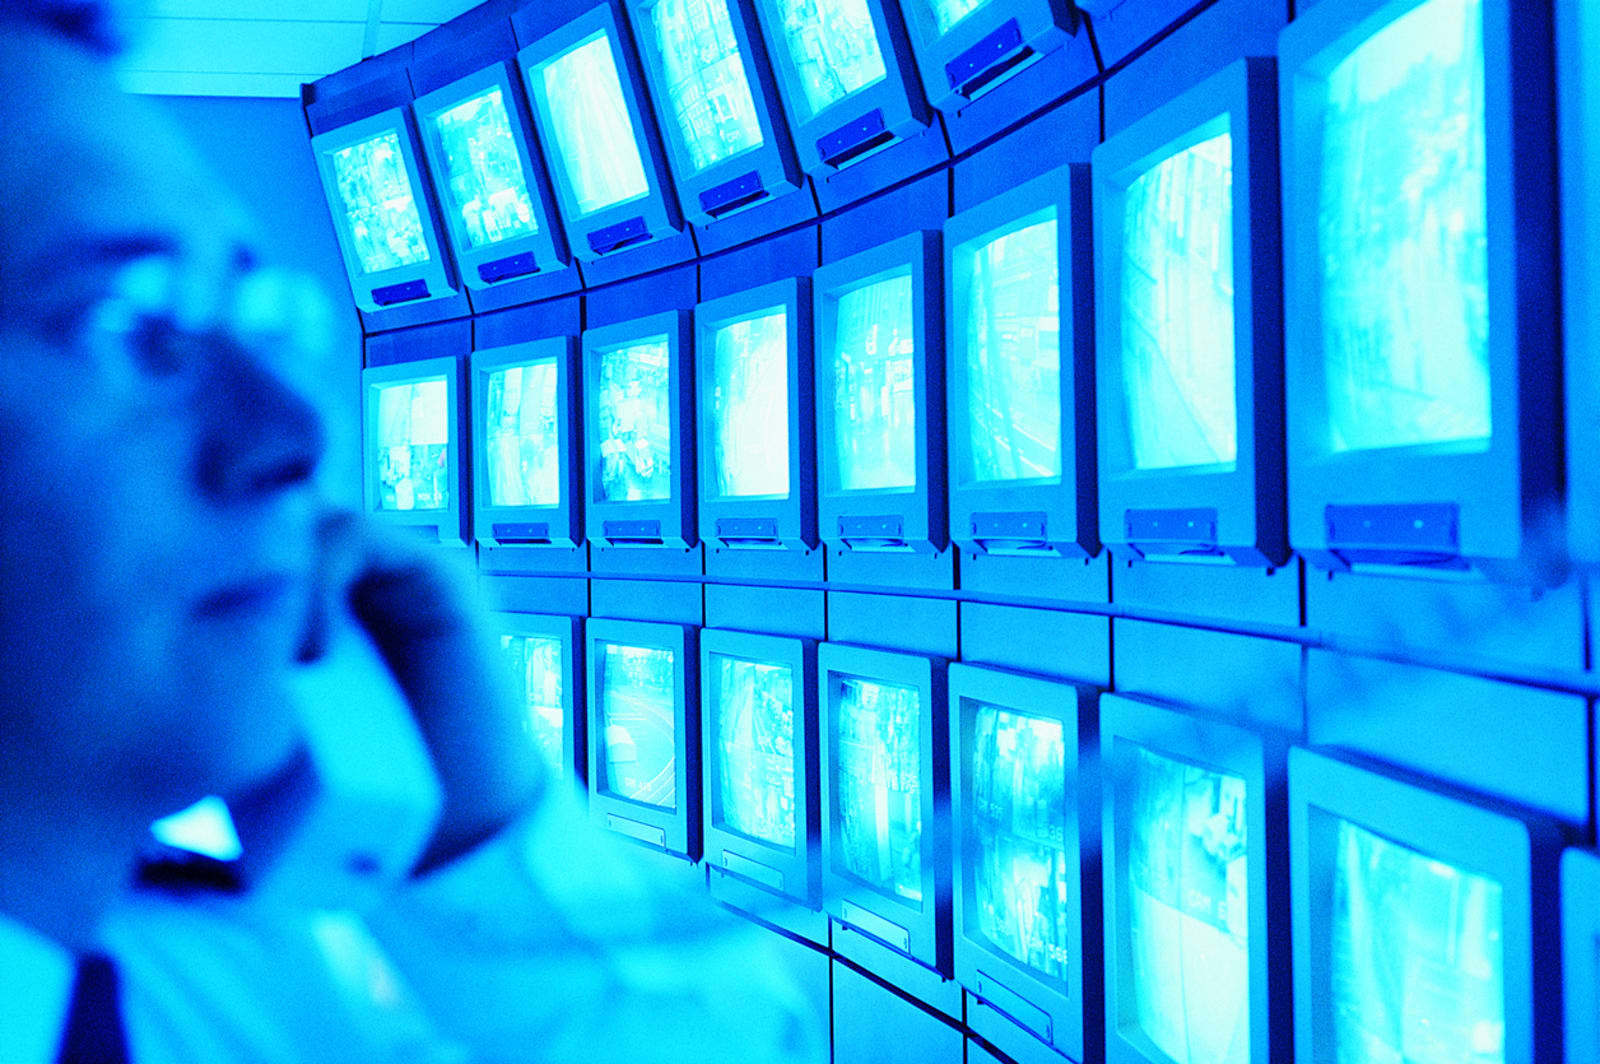 Man in a Control Room Using a Telephone and Looking at a Large Group of Surveillance TV Screens